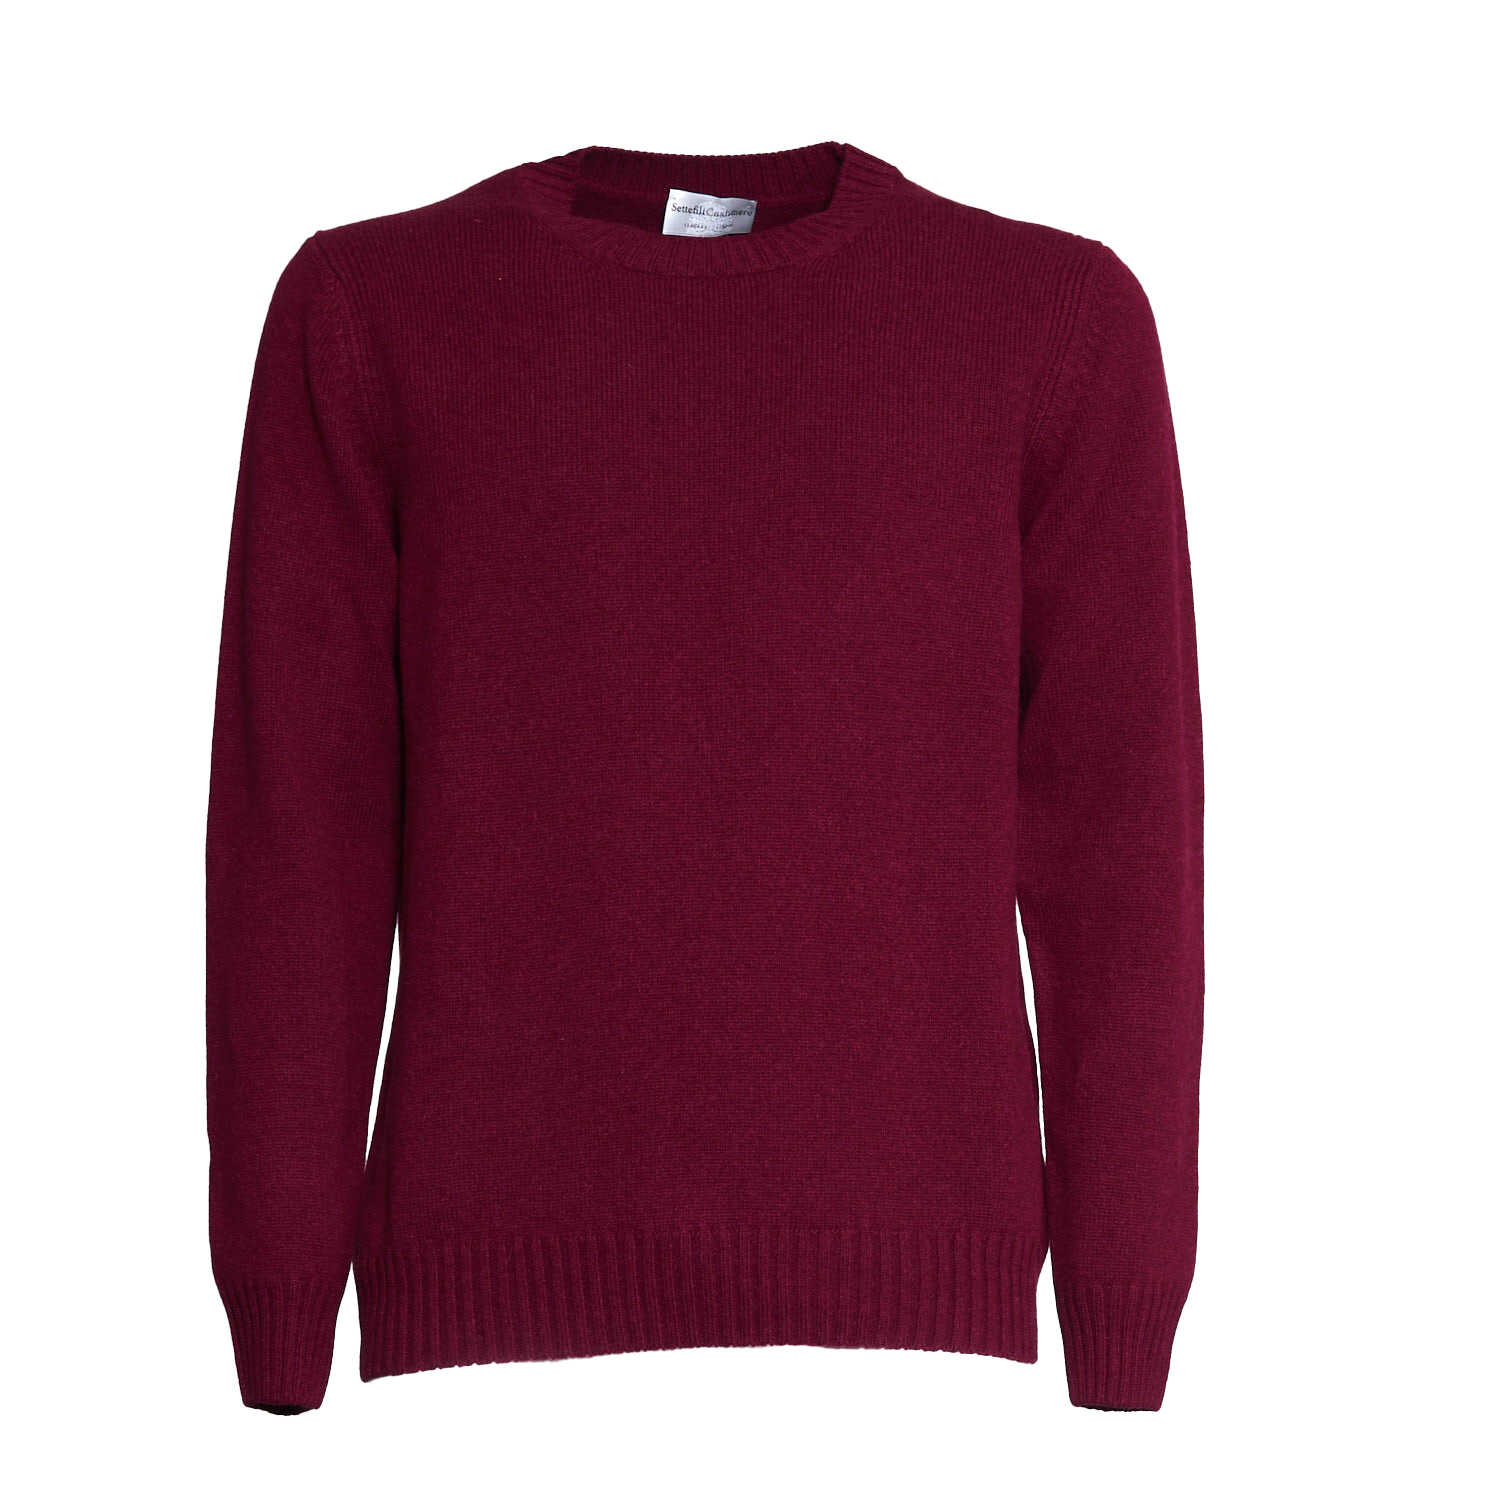 SETTEFILI CASHMERE Shaved Crew Neck Sweater N/A